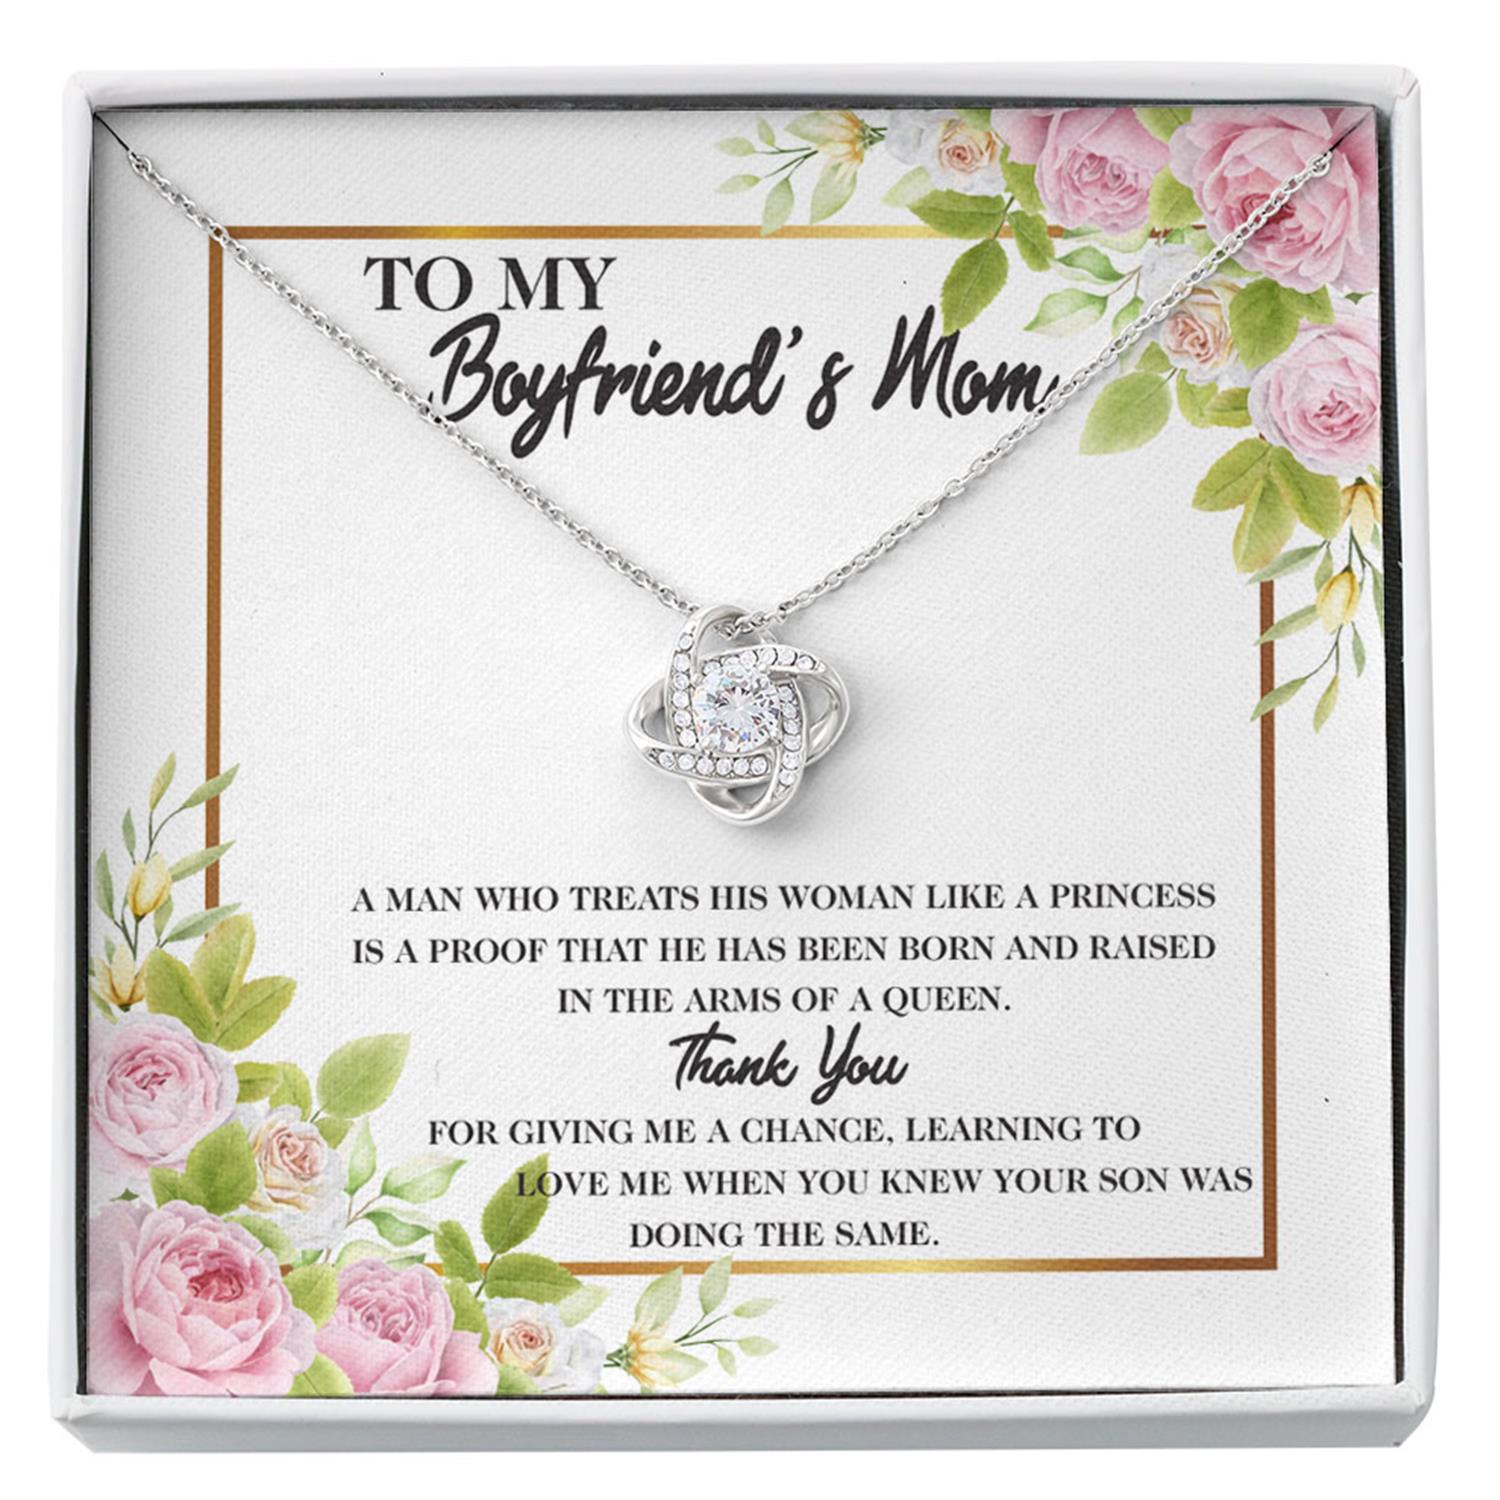 Mom Necklace, Mother-in-law Necklace, Boyfriends Mom Necklace Gift - Gift For Future Mother-in-law Custom Necklace